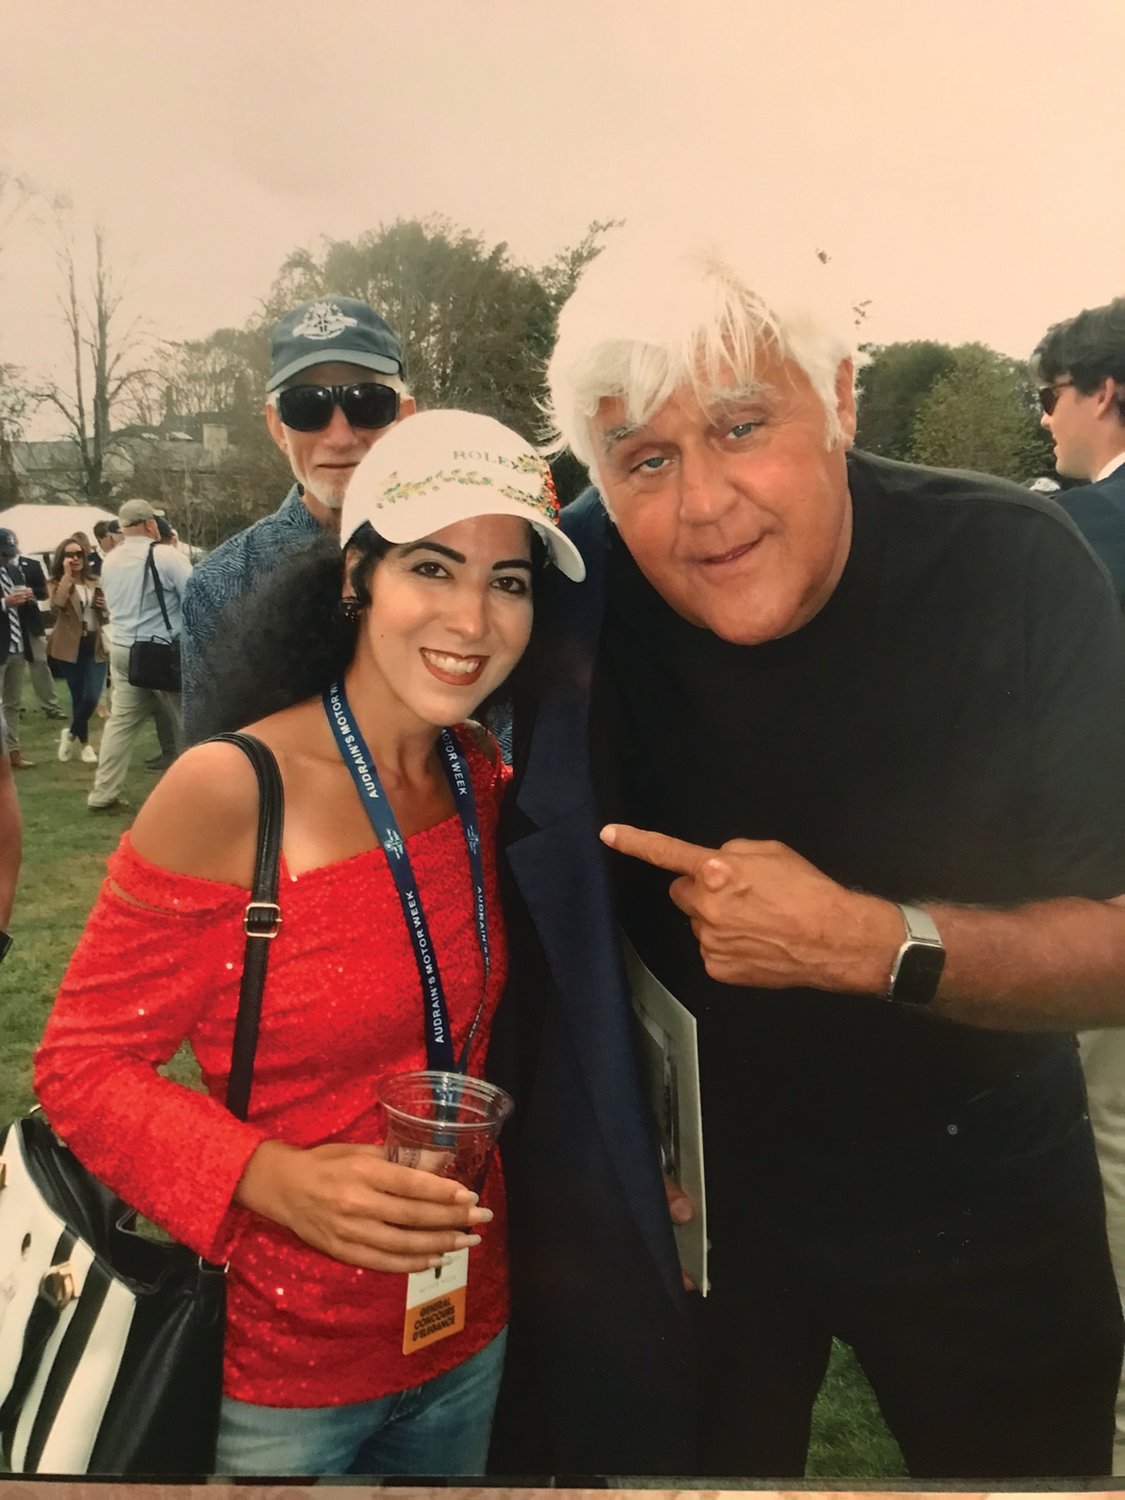 Jennifer Ricci posed for a photo with Jay Leno at the elite car show Concours d’Elegance in Newport.